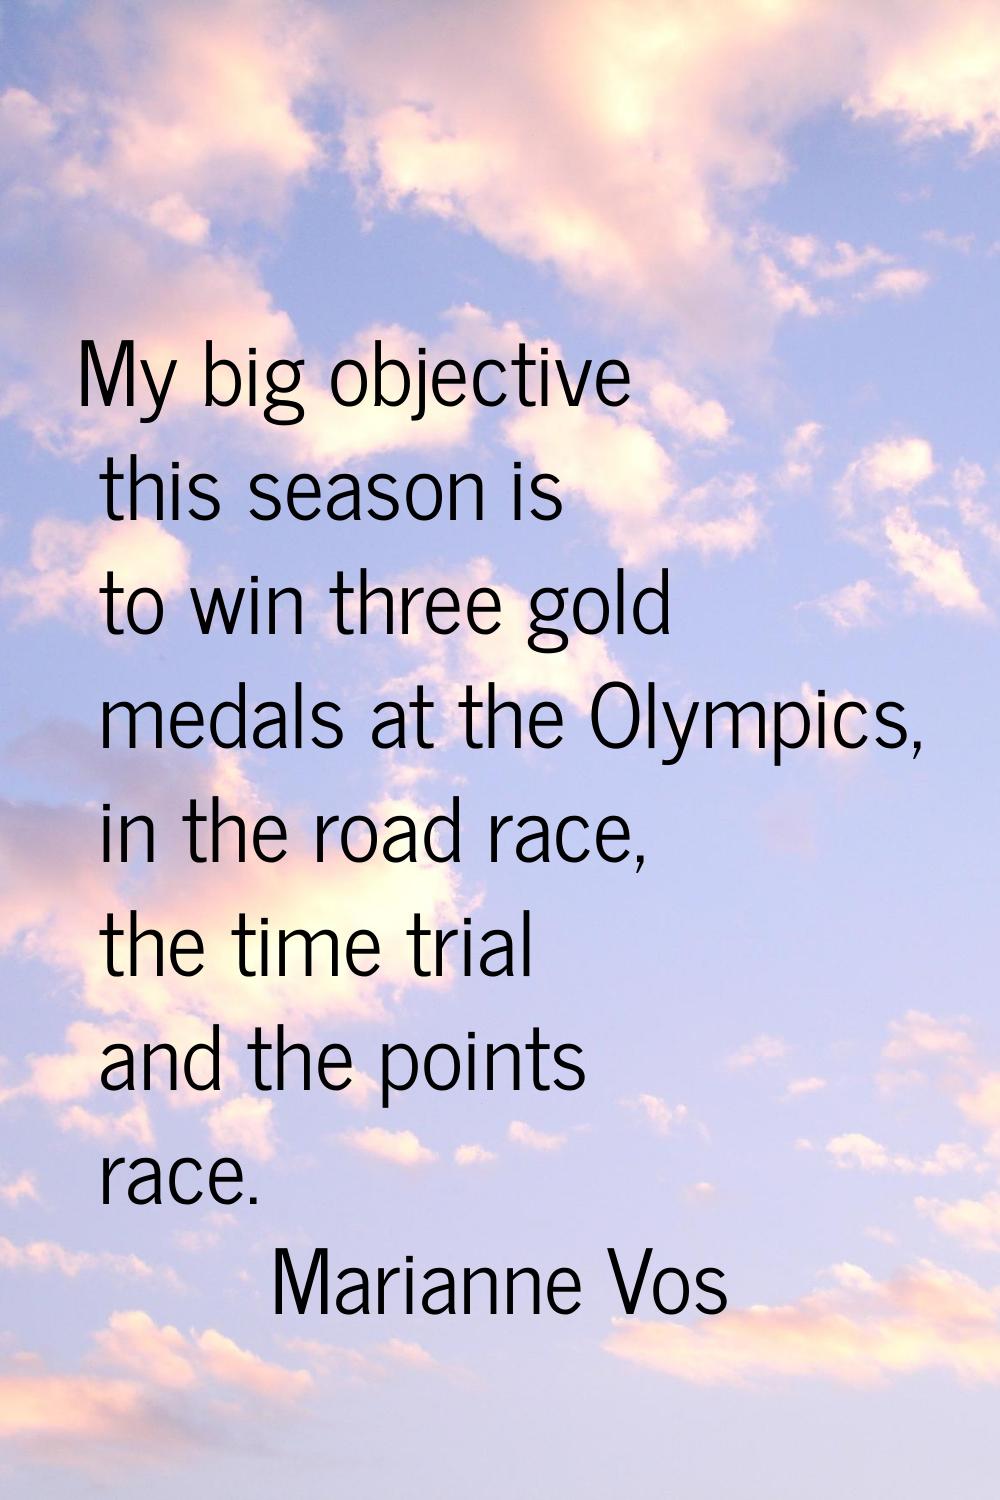 My big objective this season is to win three gold medals at the Olympics, in the road race, the tim